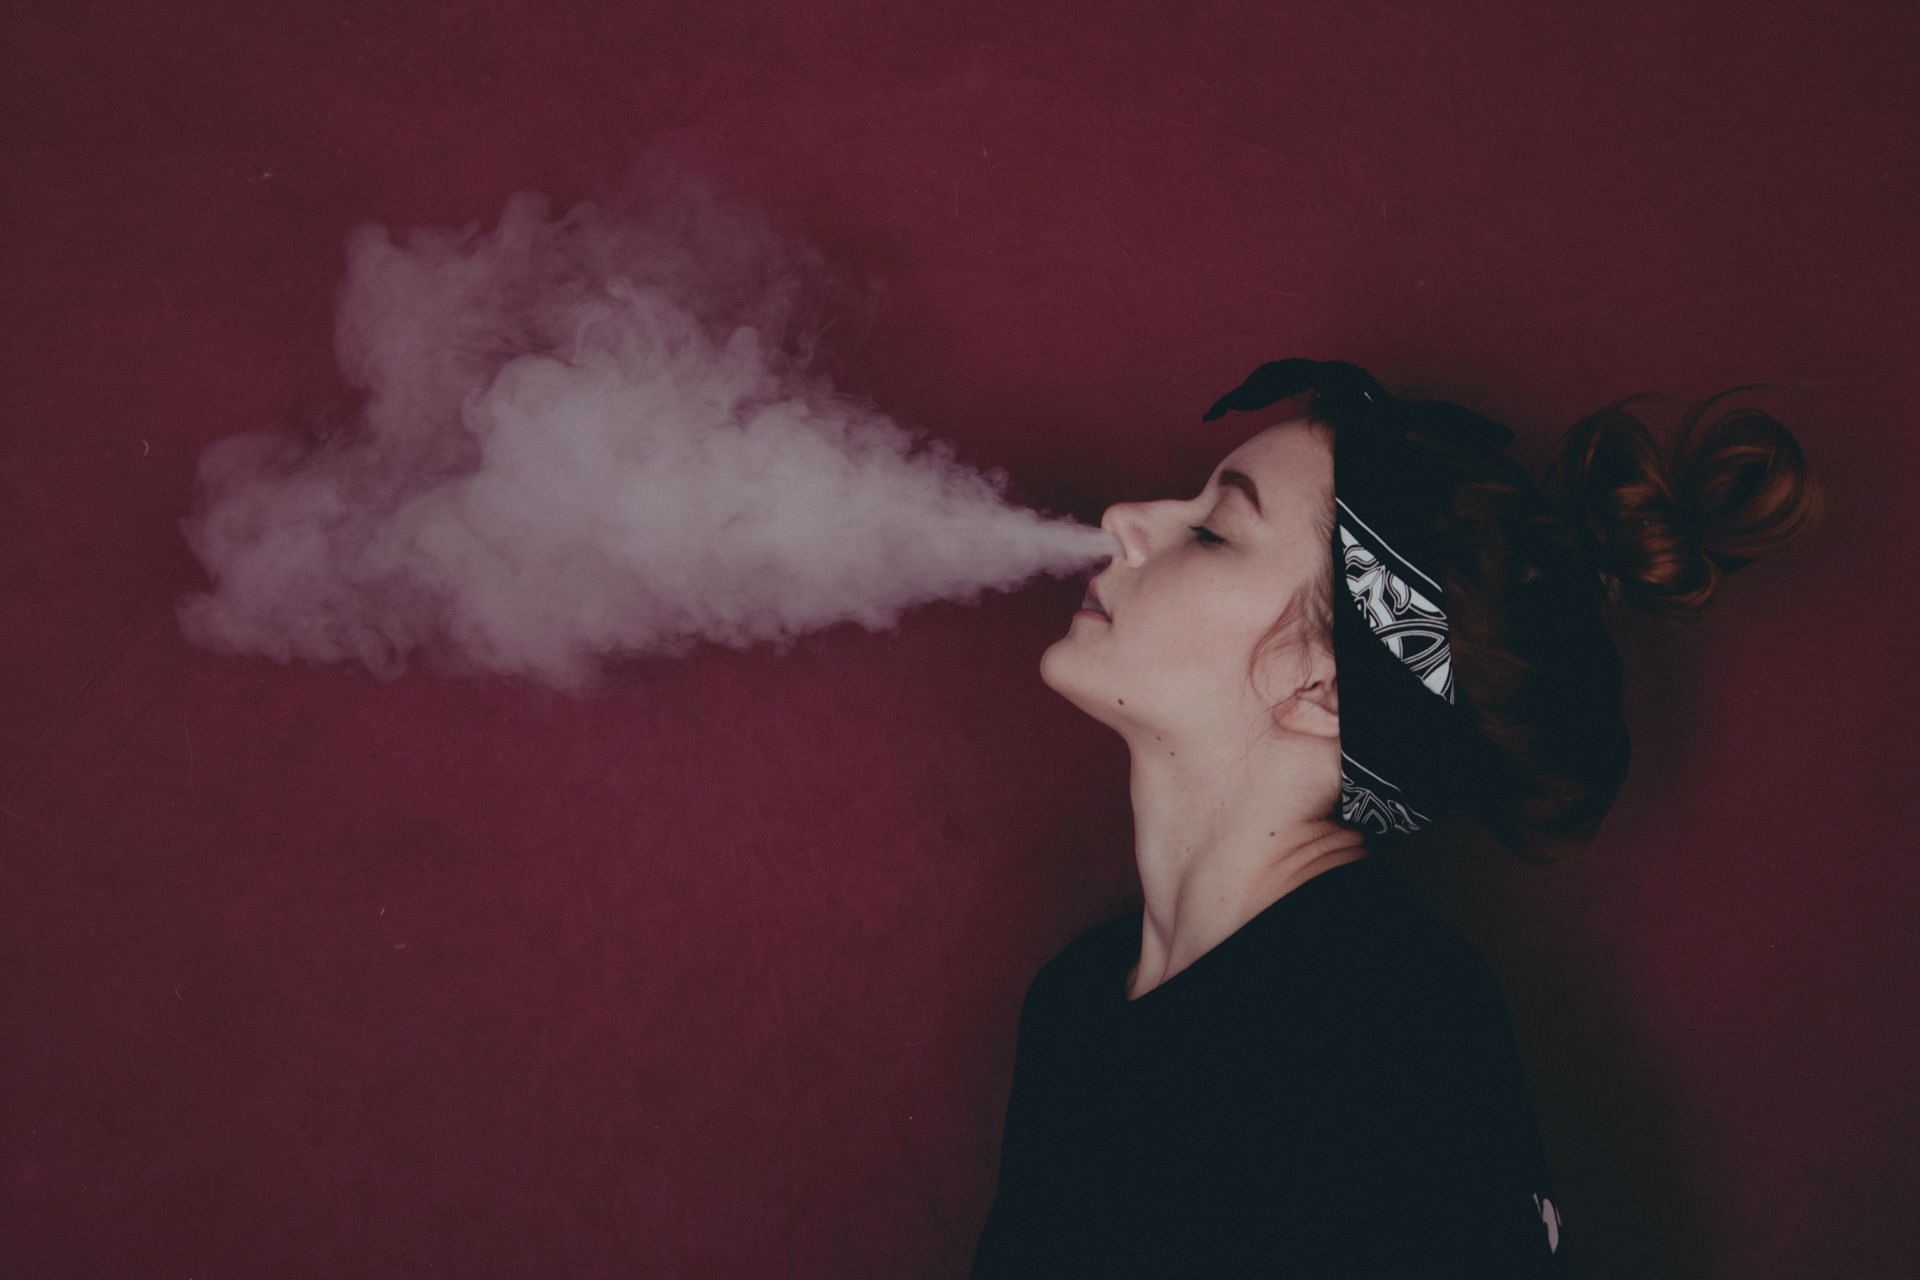 Vaping may result in feeling nauseated. (Image via Pexels/ Almighty Shilref)